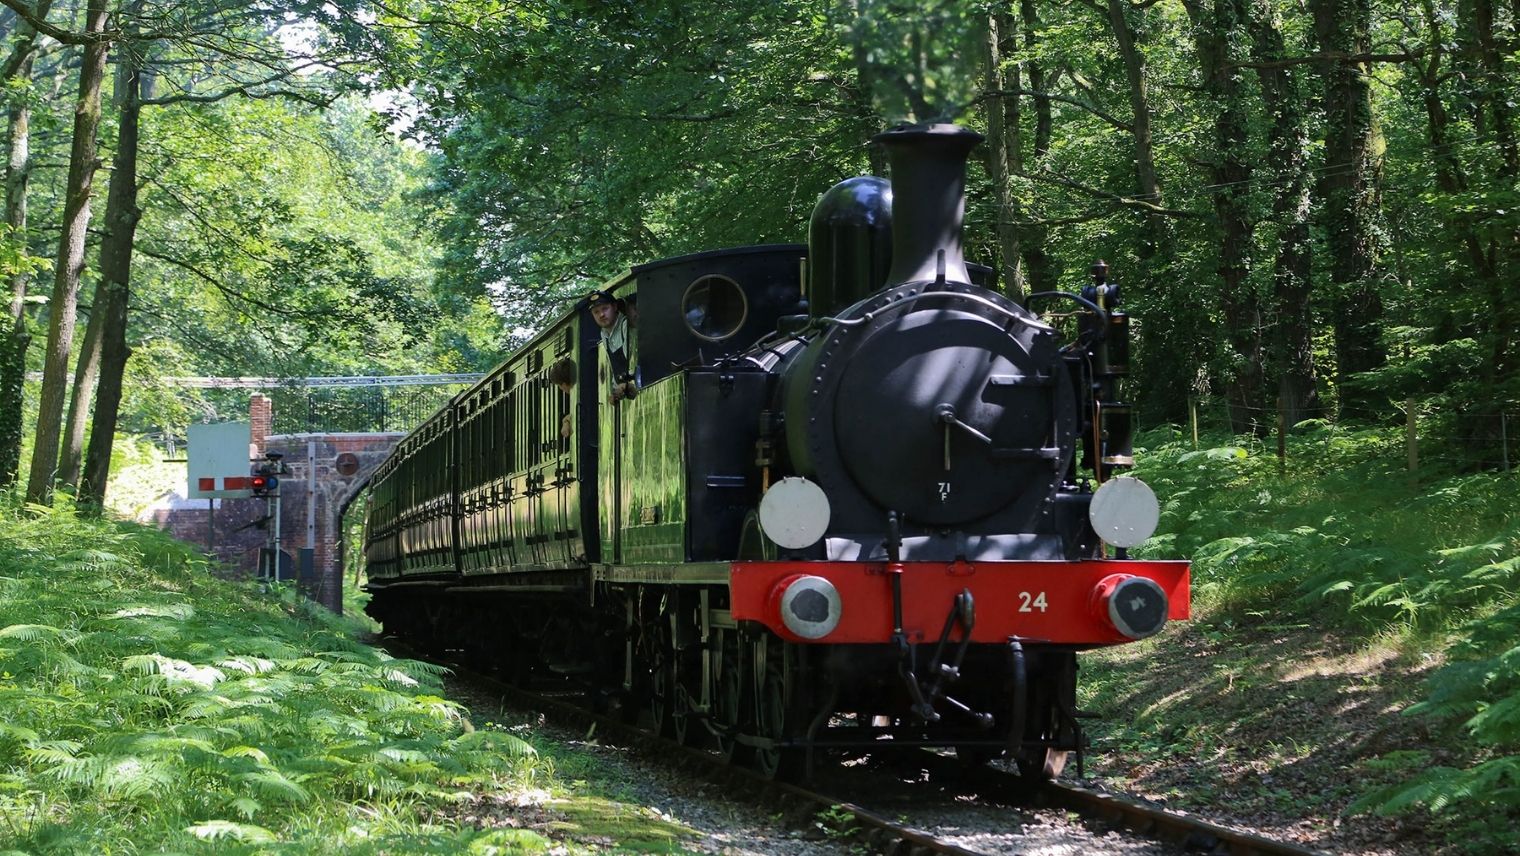 A train steaming through the countryside at the Isle of Wight Steam Railway